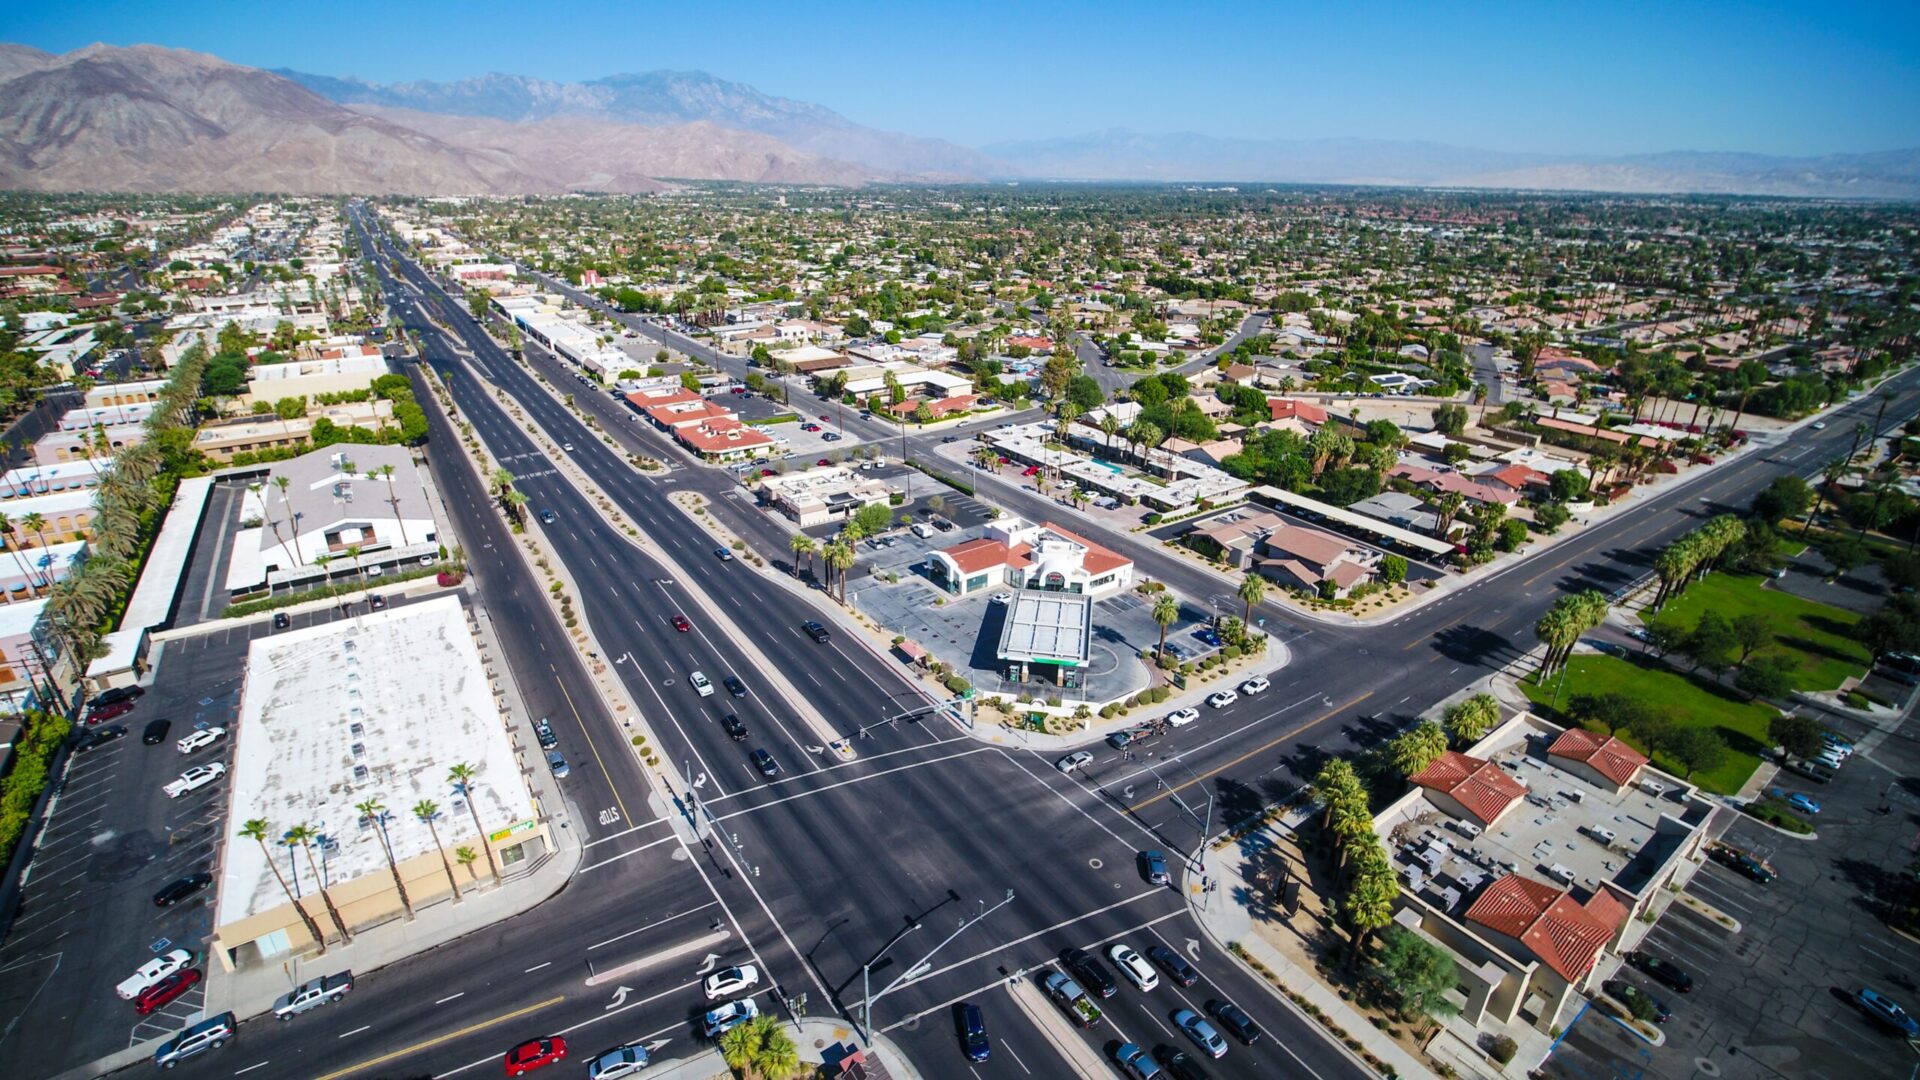 Aerial over highway 111 in the heart of the Coachella Valley.